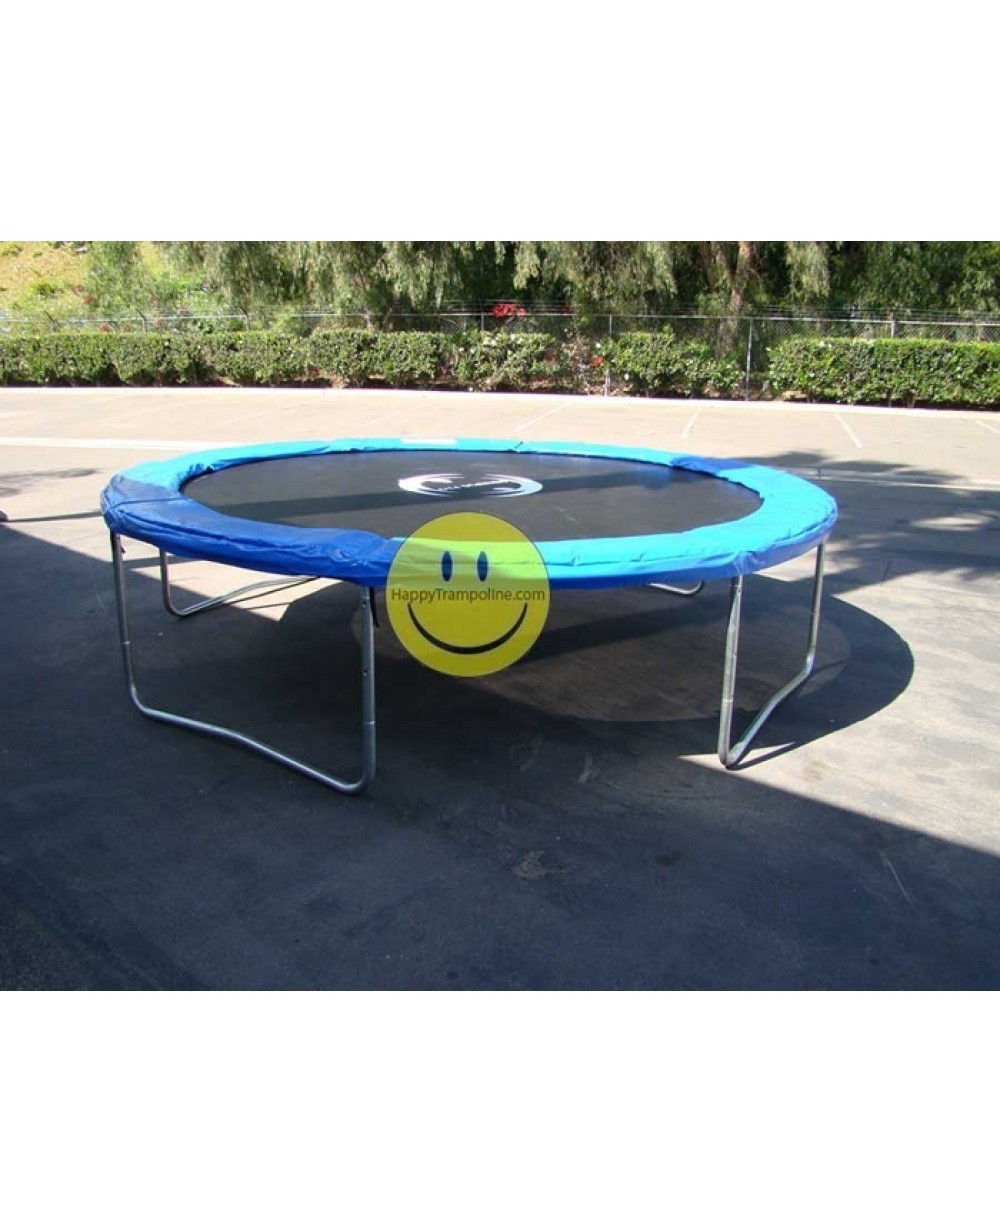 10 ft galactic xtreme trampoline without enclosure